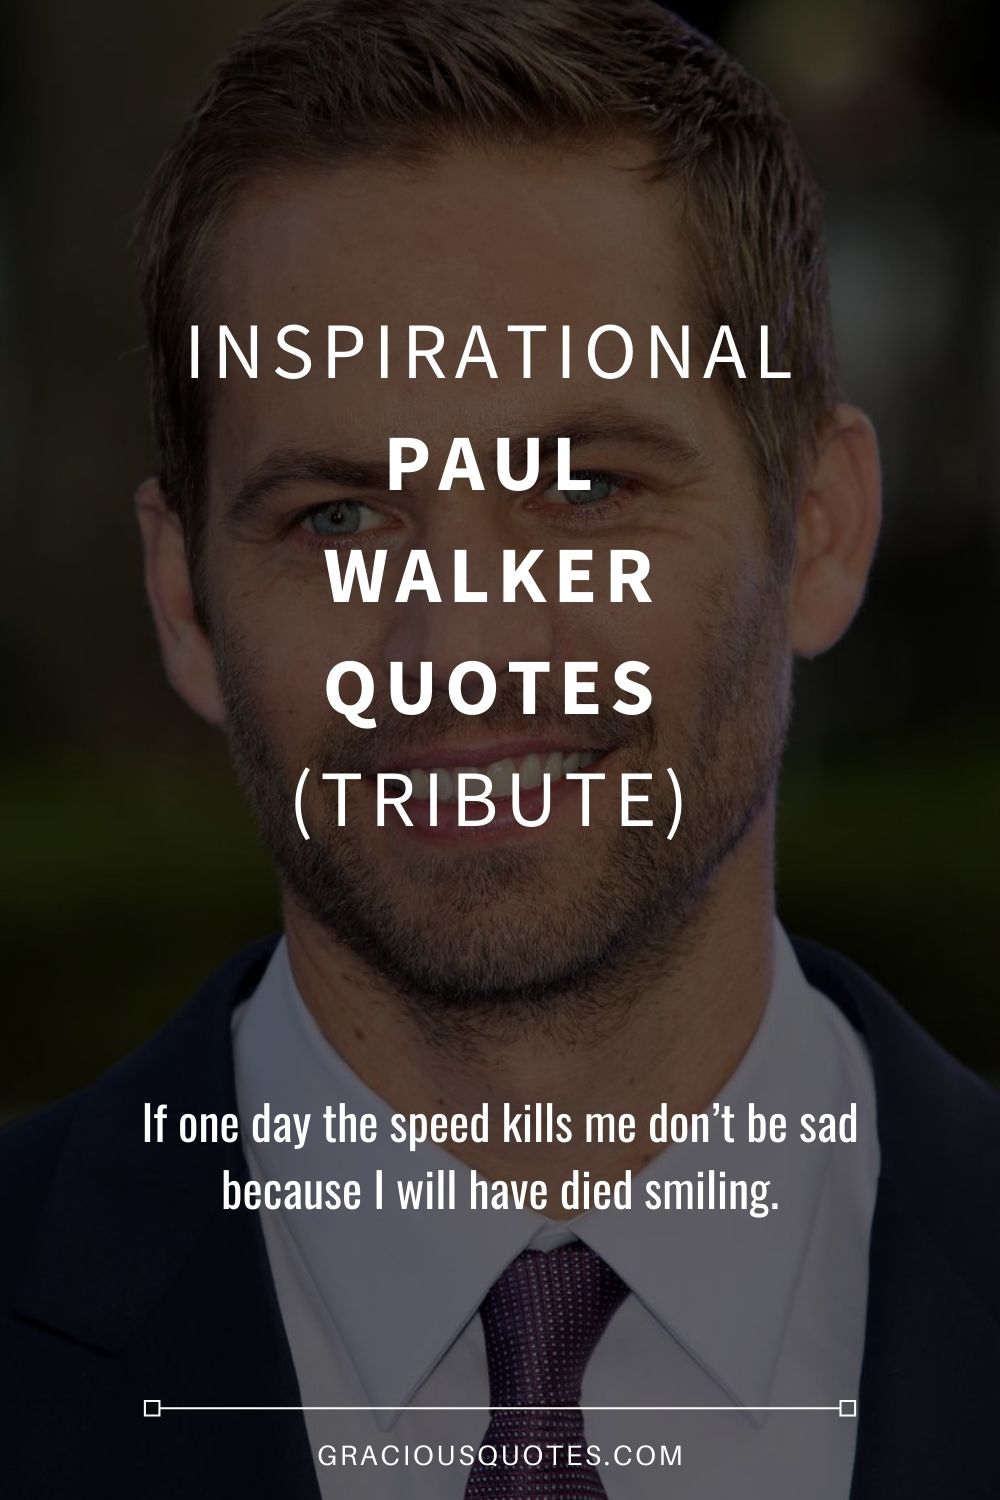 Inspirational Paul Walker Quotes (TRIBUTE) - Gracious Quotes